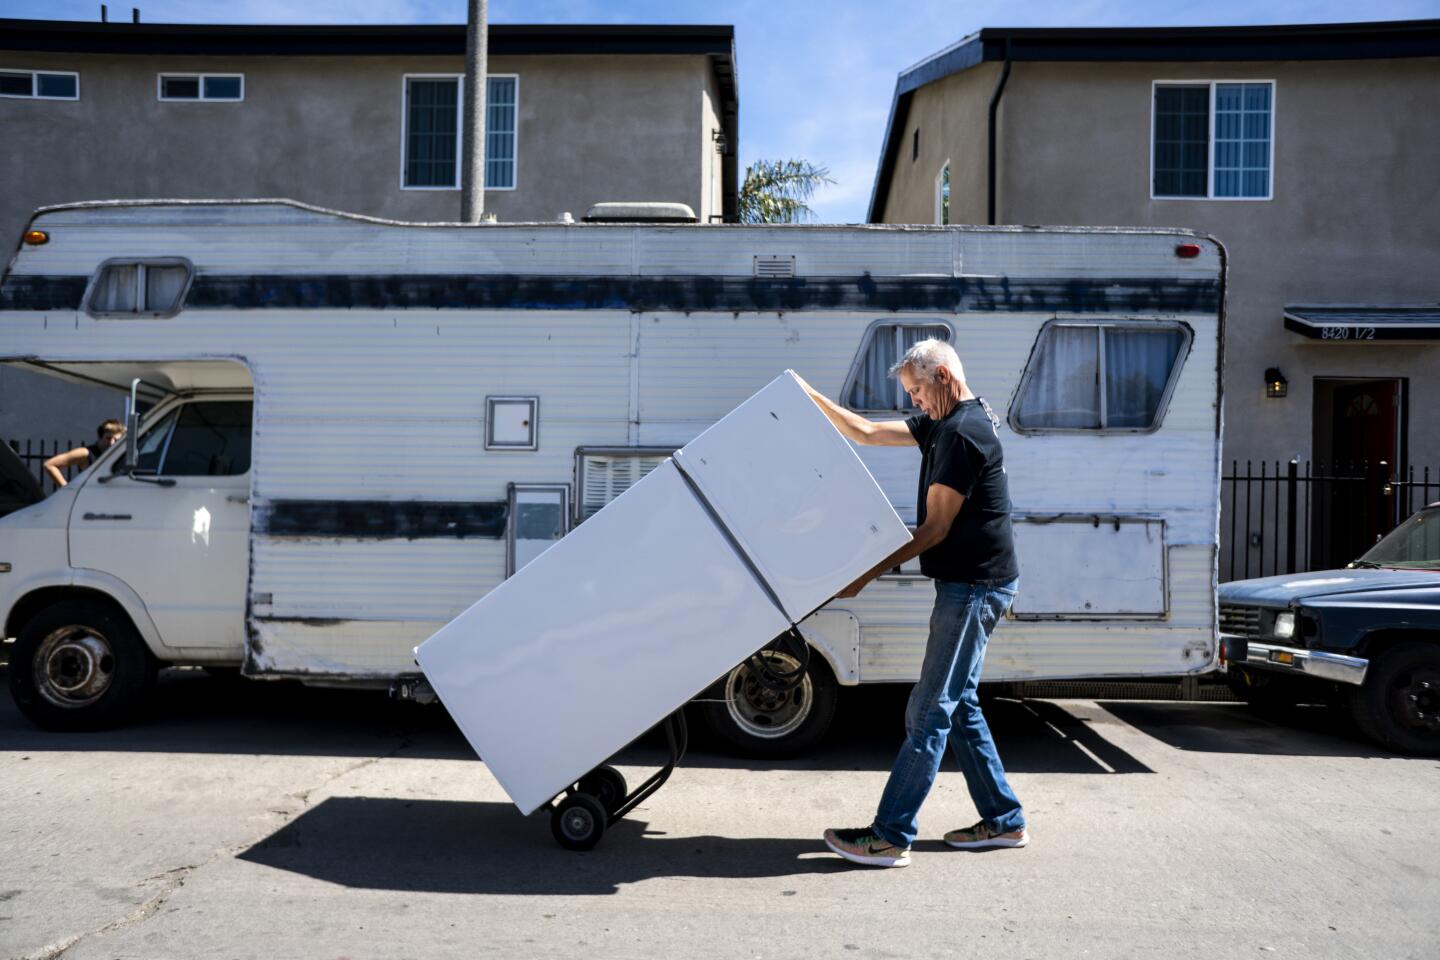 LOS ANGELES, CA - MARCH 06: John Betz rolls a refrigerator down Wall street as he and Heidi Roberts (not pictured) setup two duplex housing units in south Los Angeles on March 06, 2018 in Los Angeles, California. The units, will be rented out to homeless people in what is called shared housing. (Kent Nishimura / Los Angeles Times)